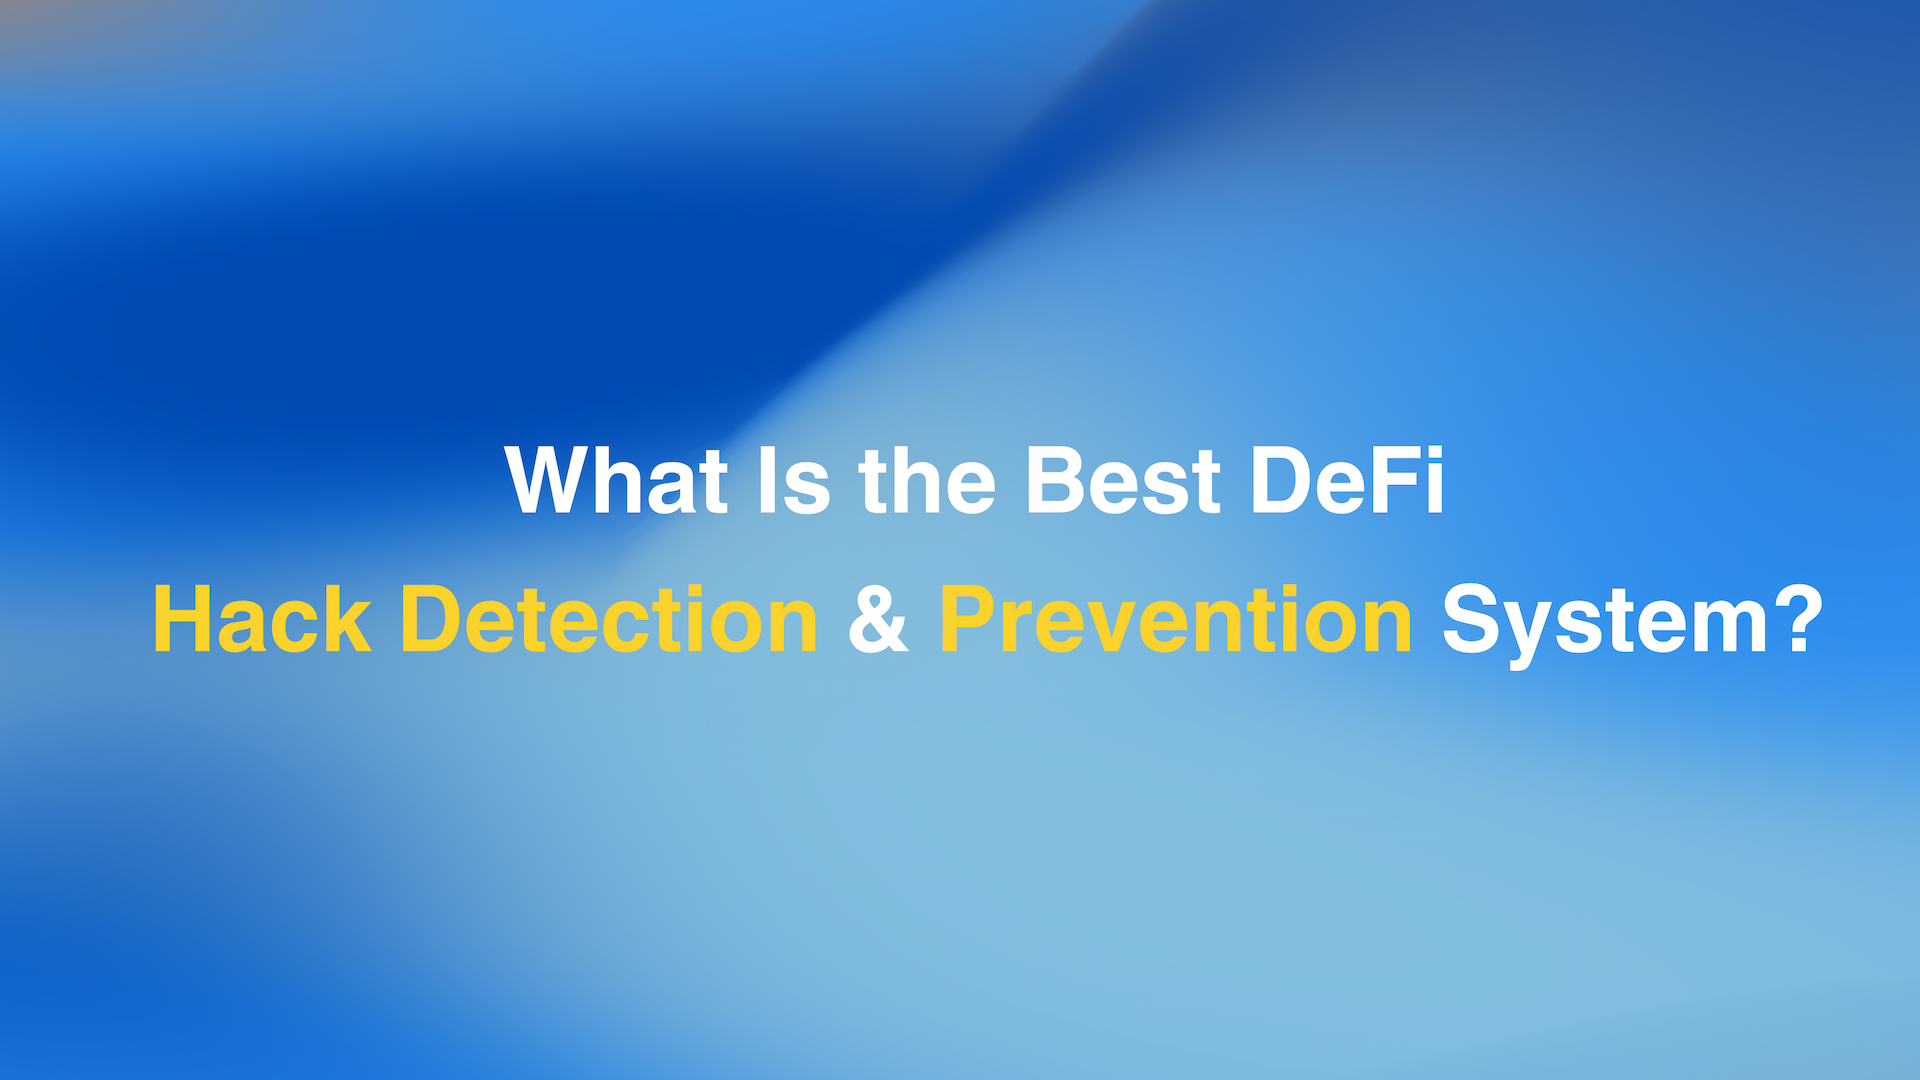 What Is the Best DeFi Hack Detection and Prevention System?